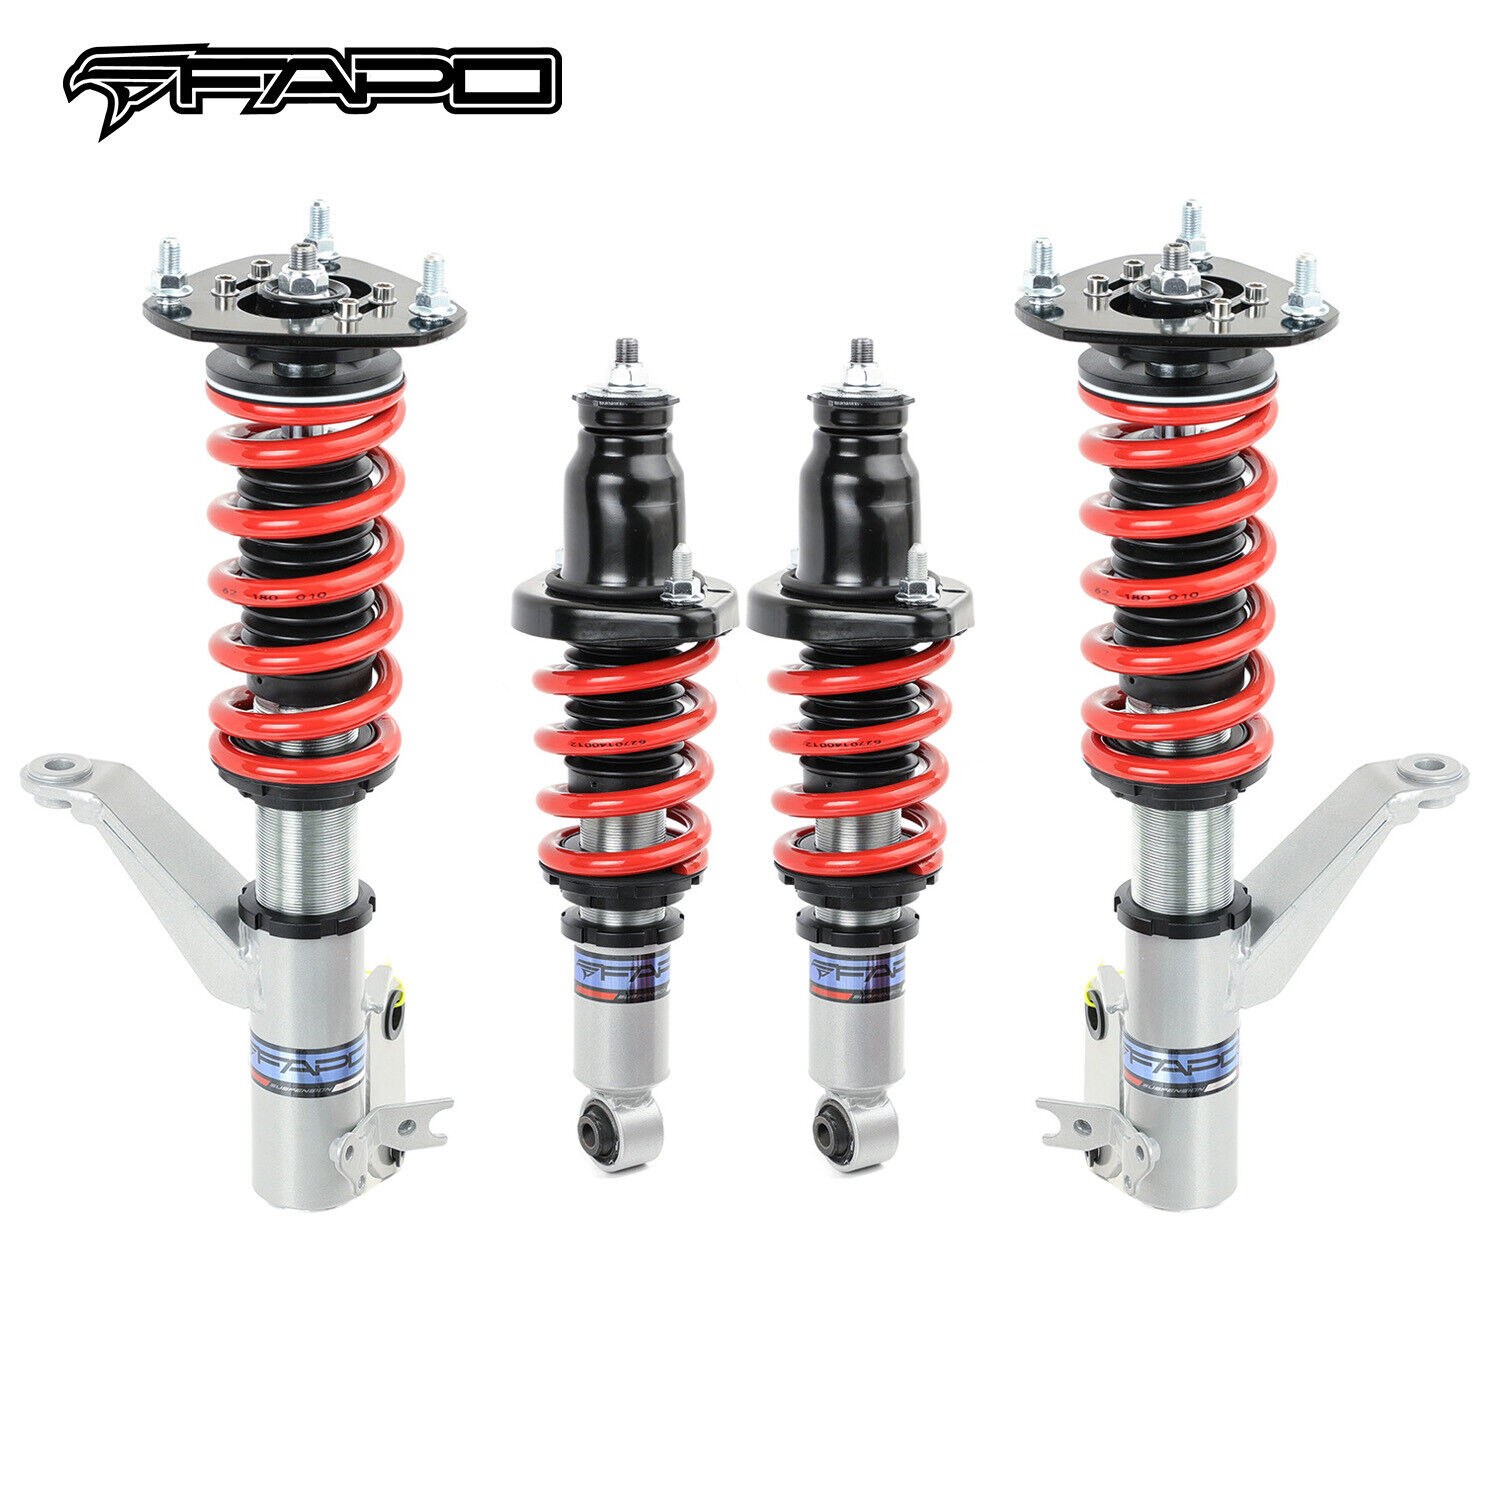 FAPO Full Coilover Suspension lowering kits for Honda Civic EM2 Coupe 2001-2005 